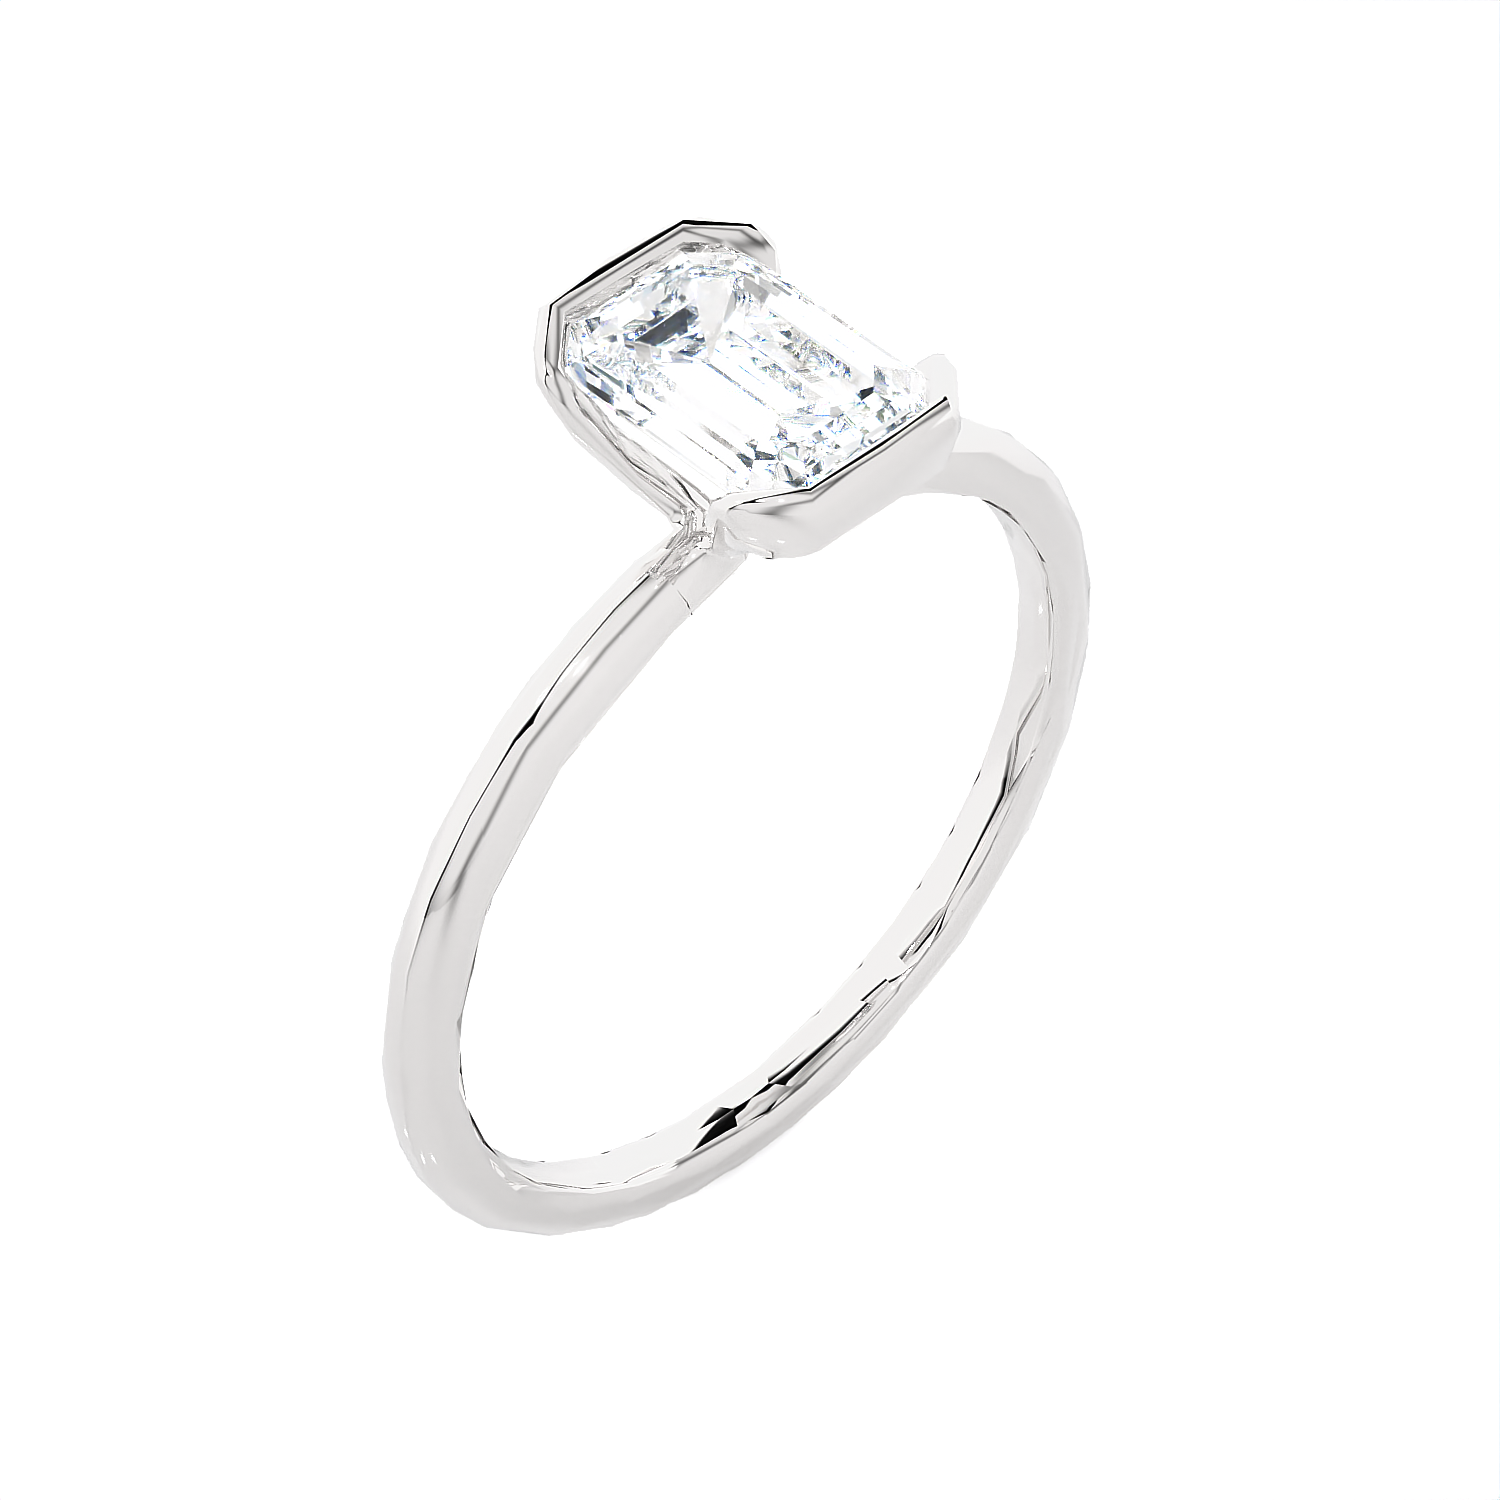 1 ctw Emerald-Cut Lab Grown Diamond Solitaire Engagement Ring